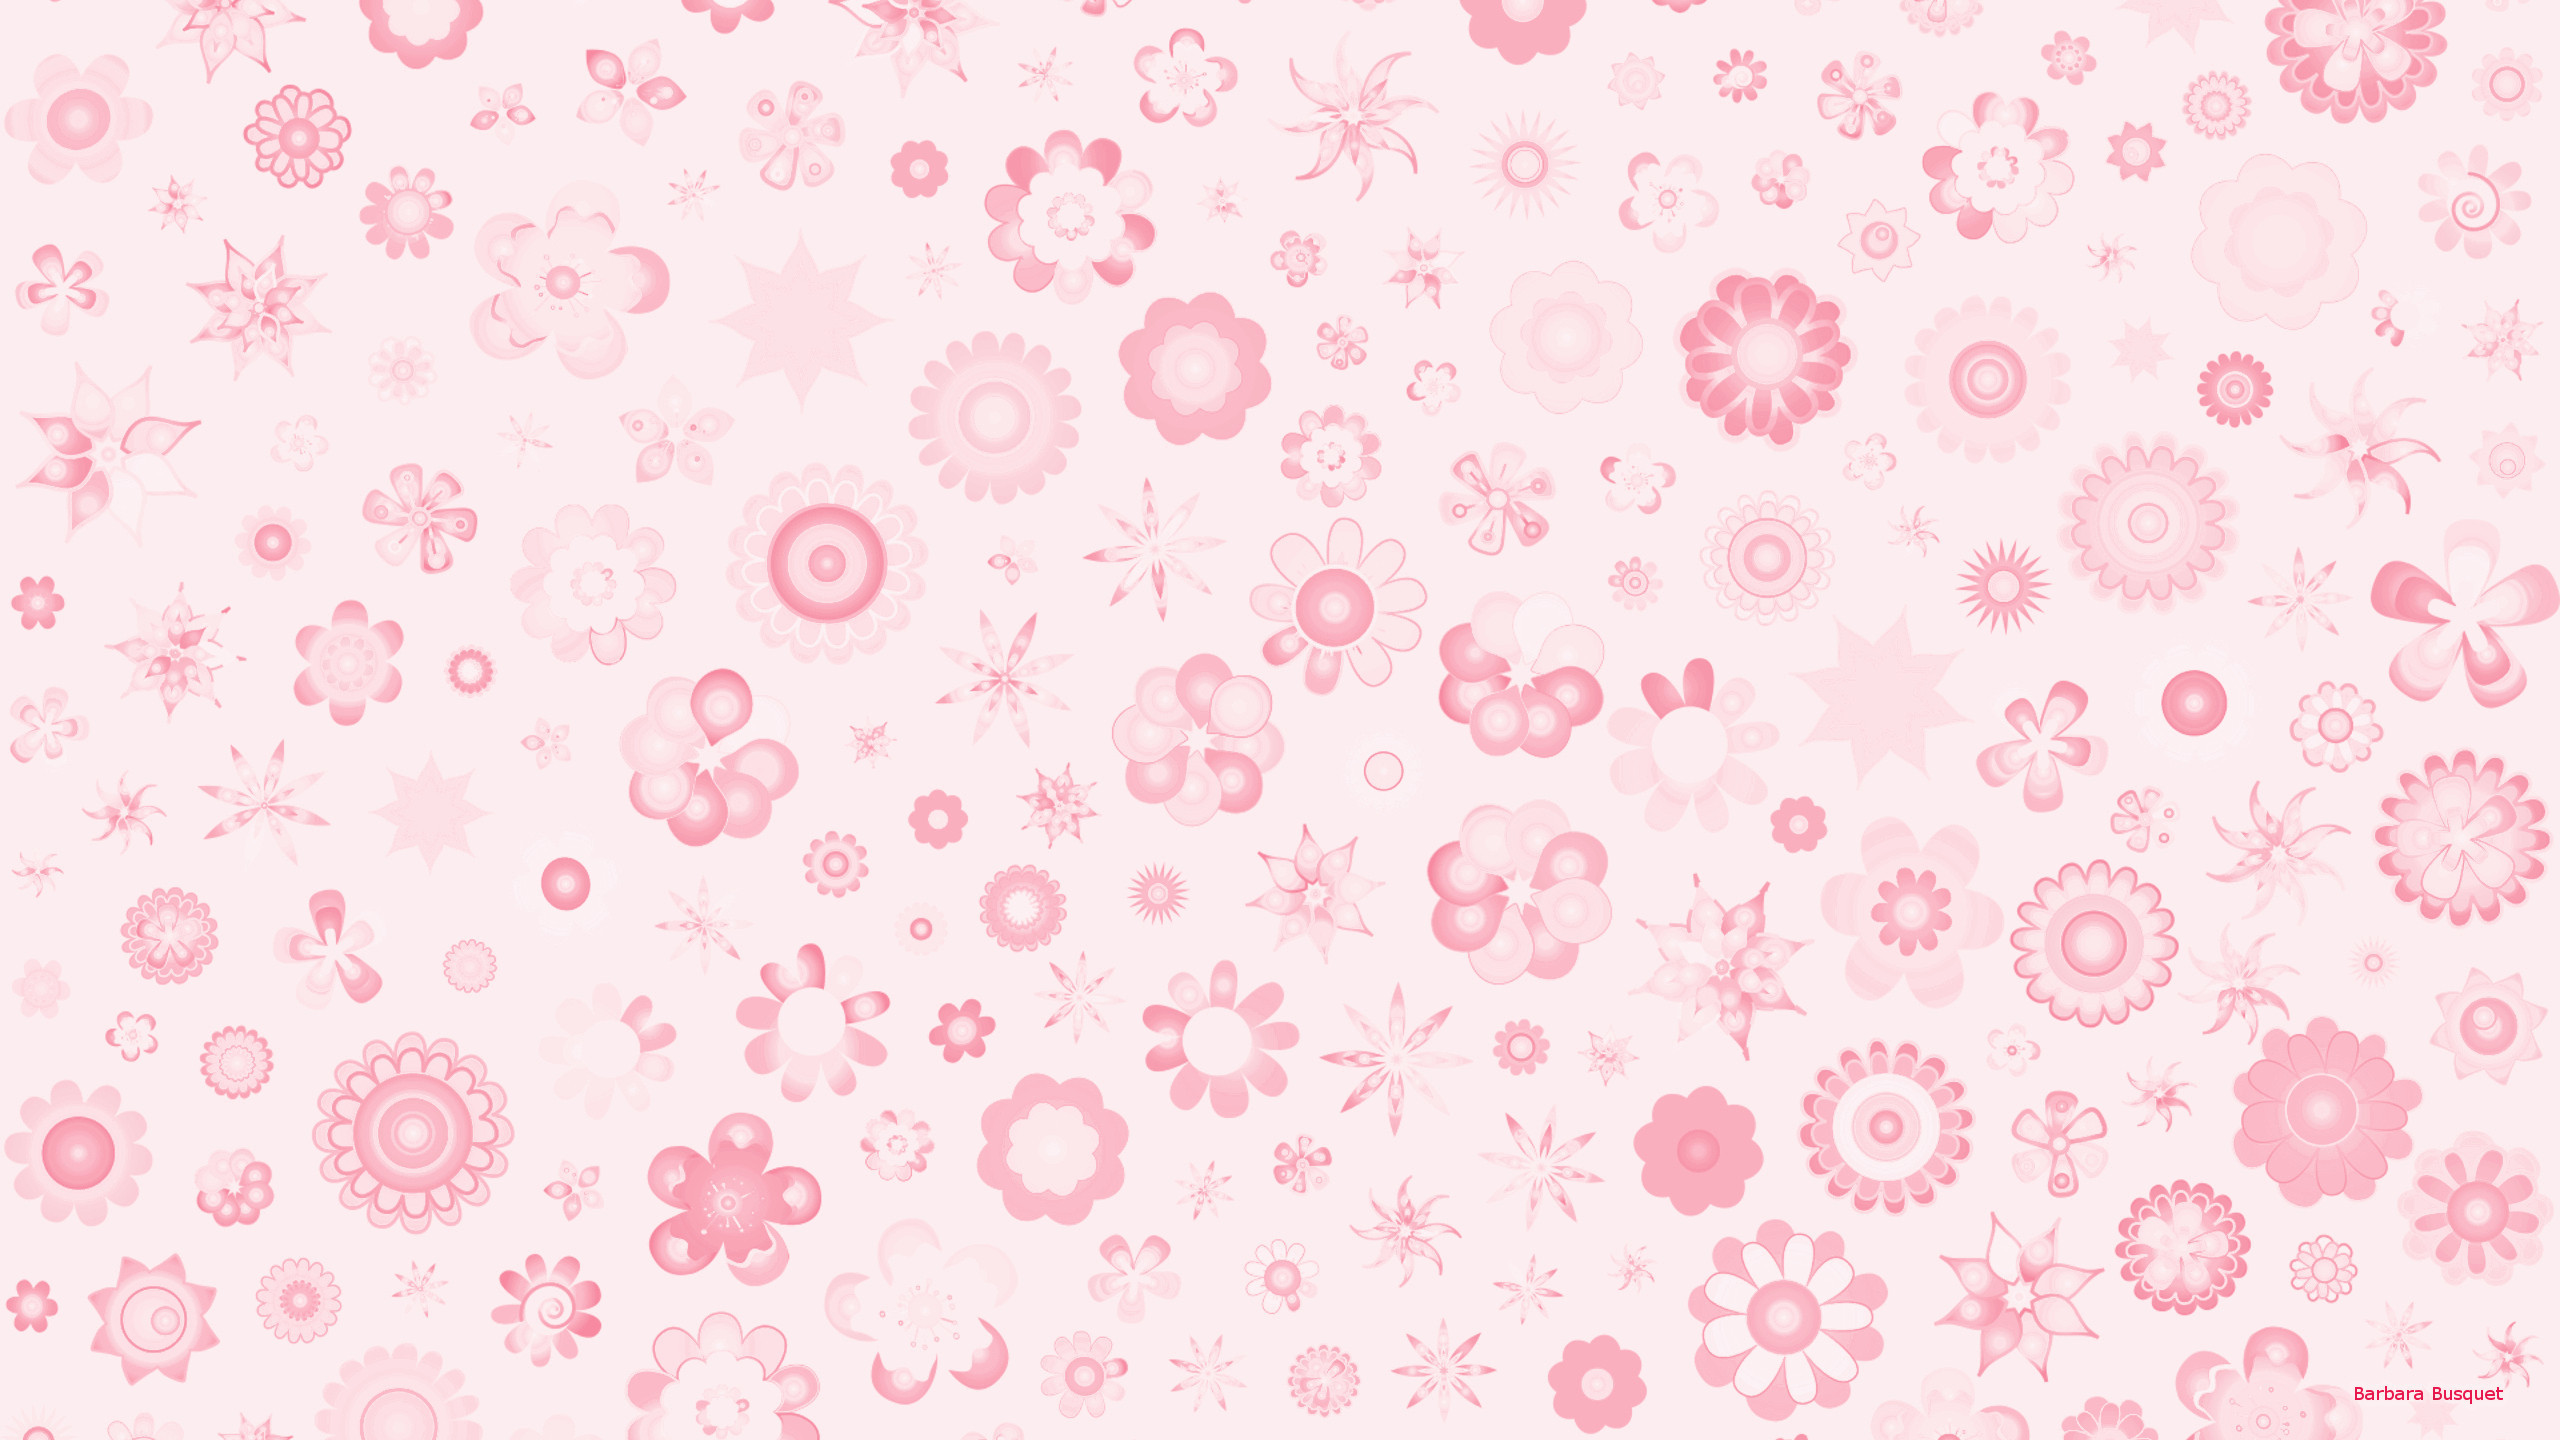 Soft Pink Backgrounds (41+ pictures)